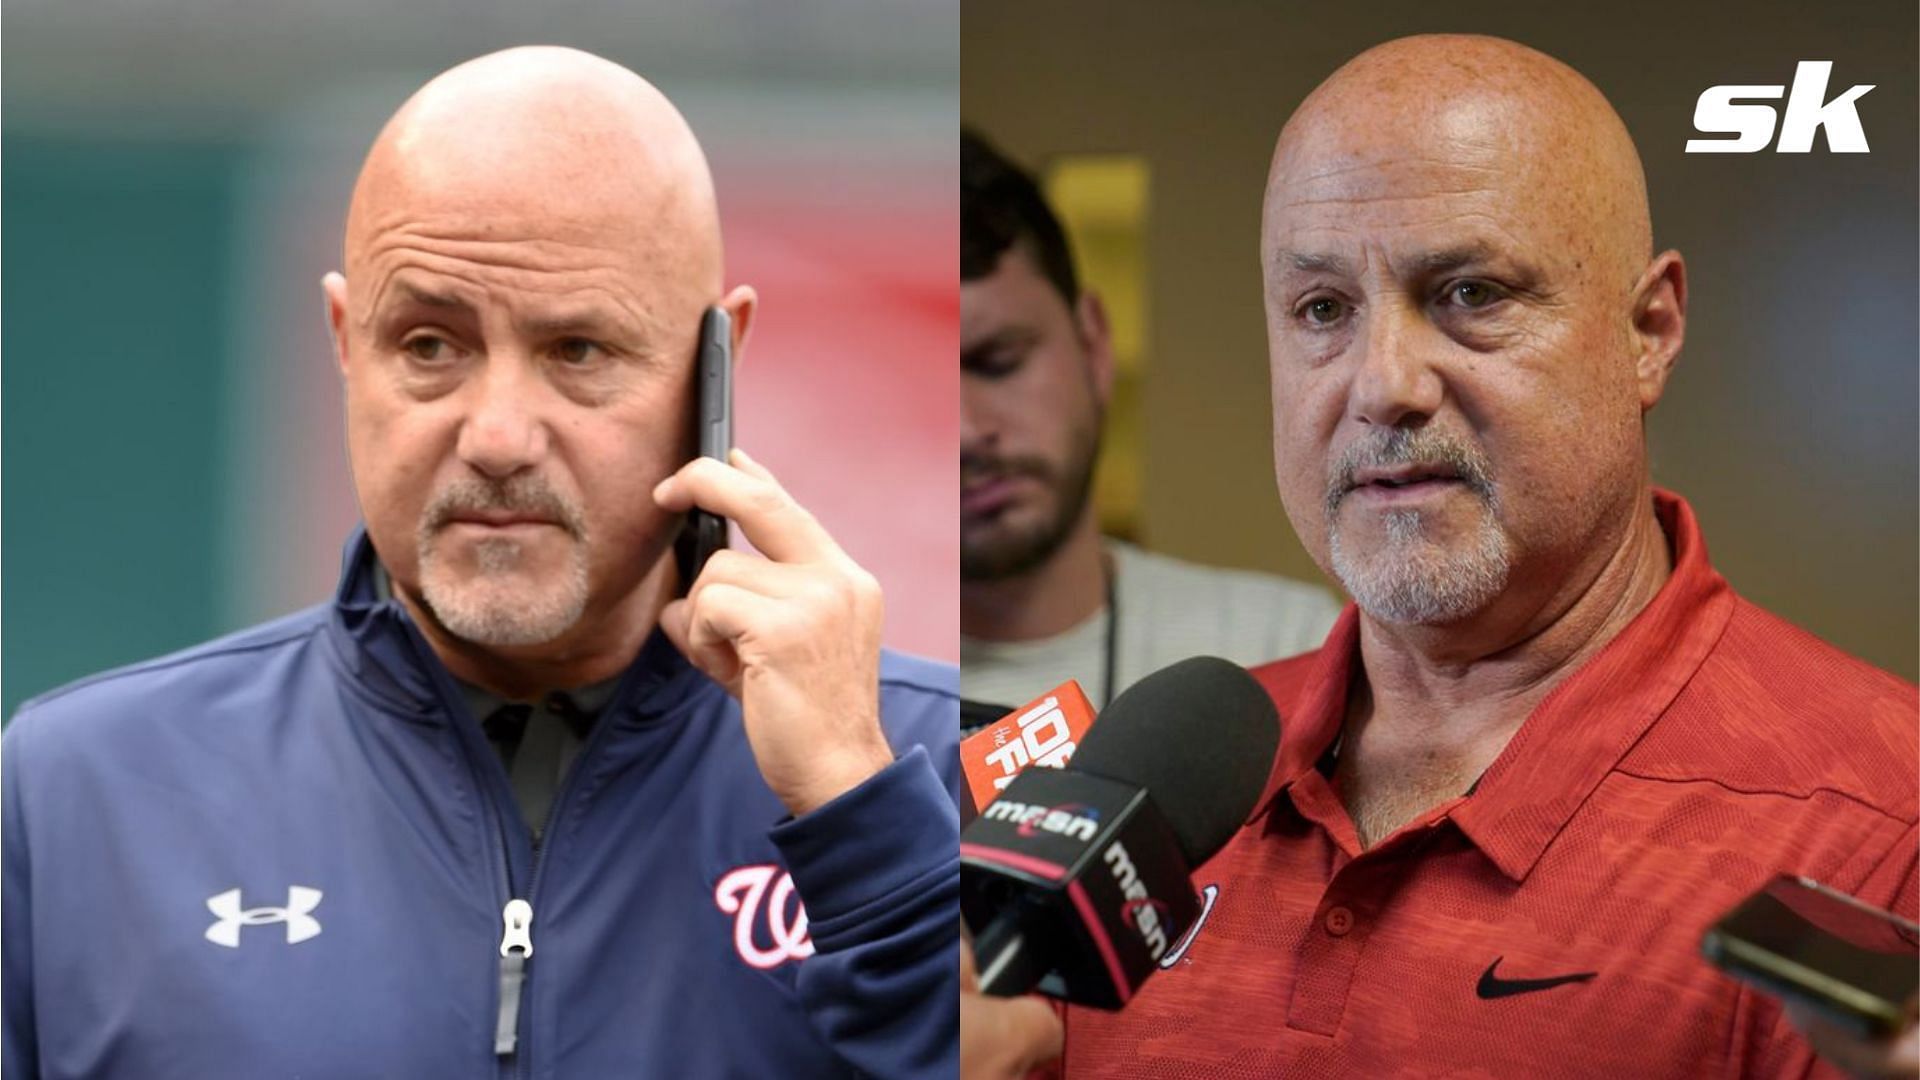 Nationals GM Mike Rizzo says the team has made it clear to his